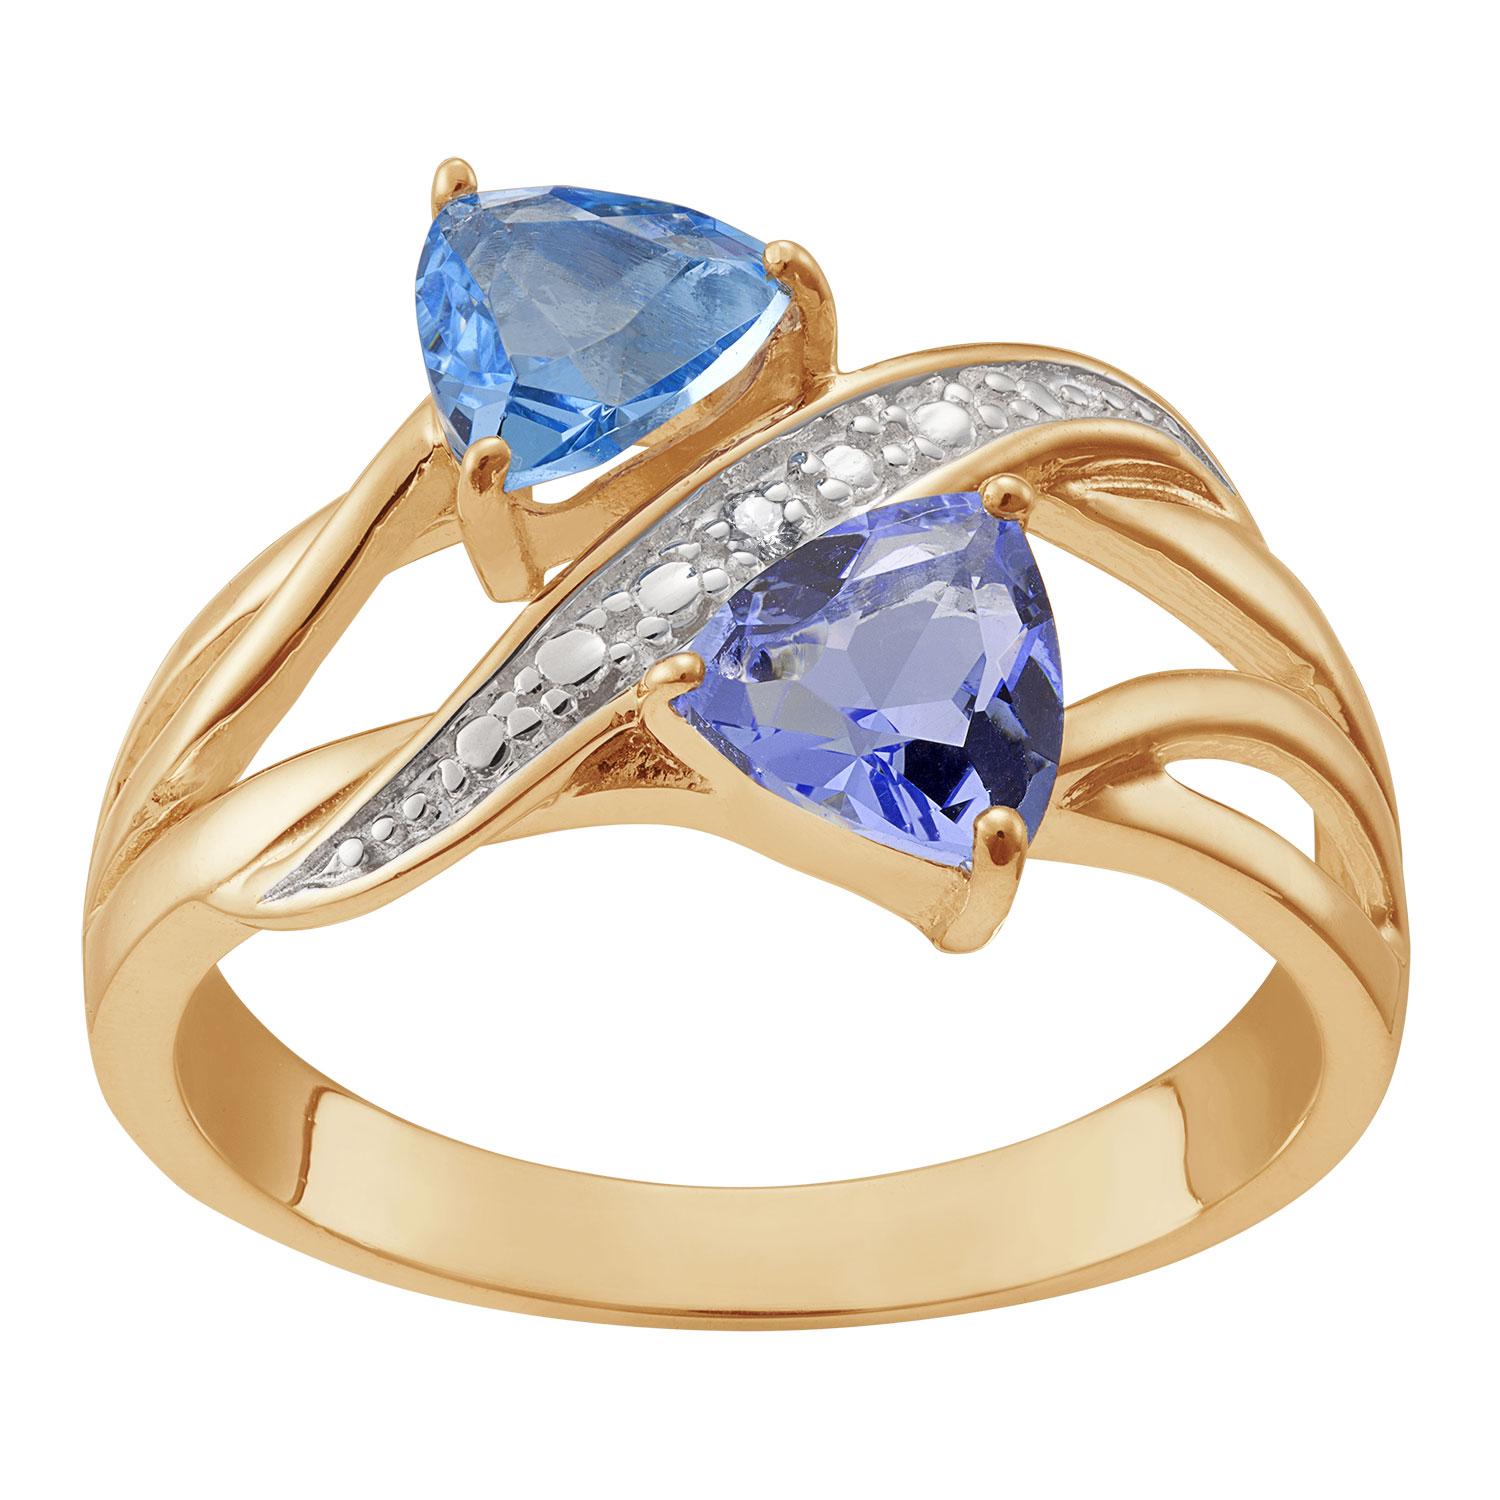 14K Gold over Sterling Couple's Trillion-cut Birthstone Ring with Diamond Accent